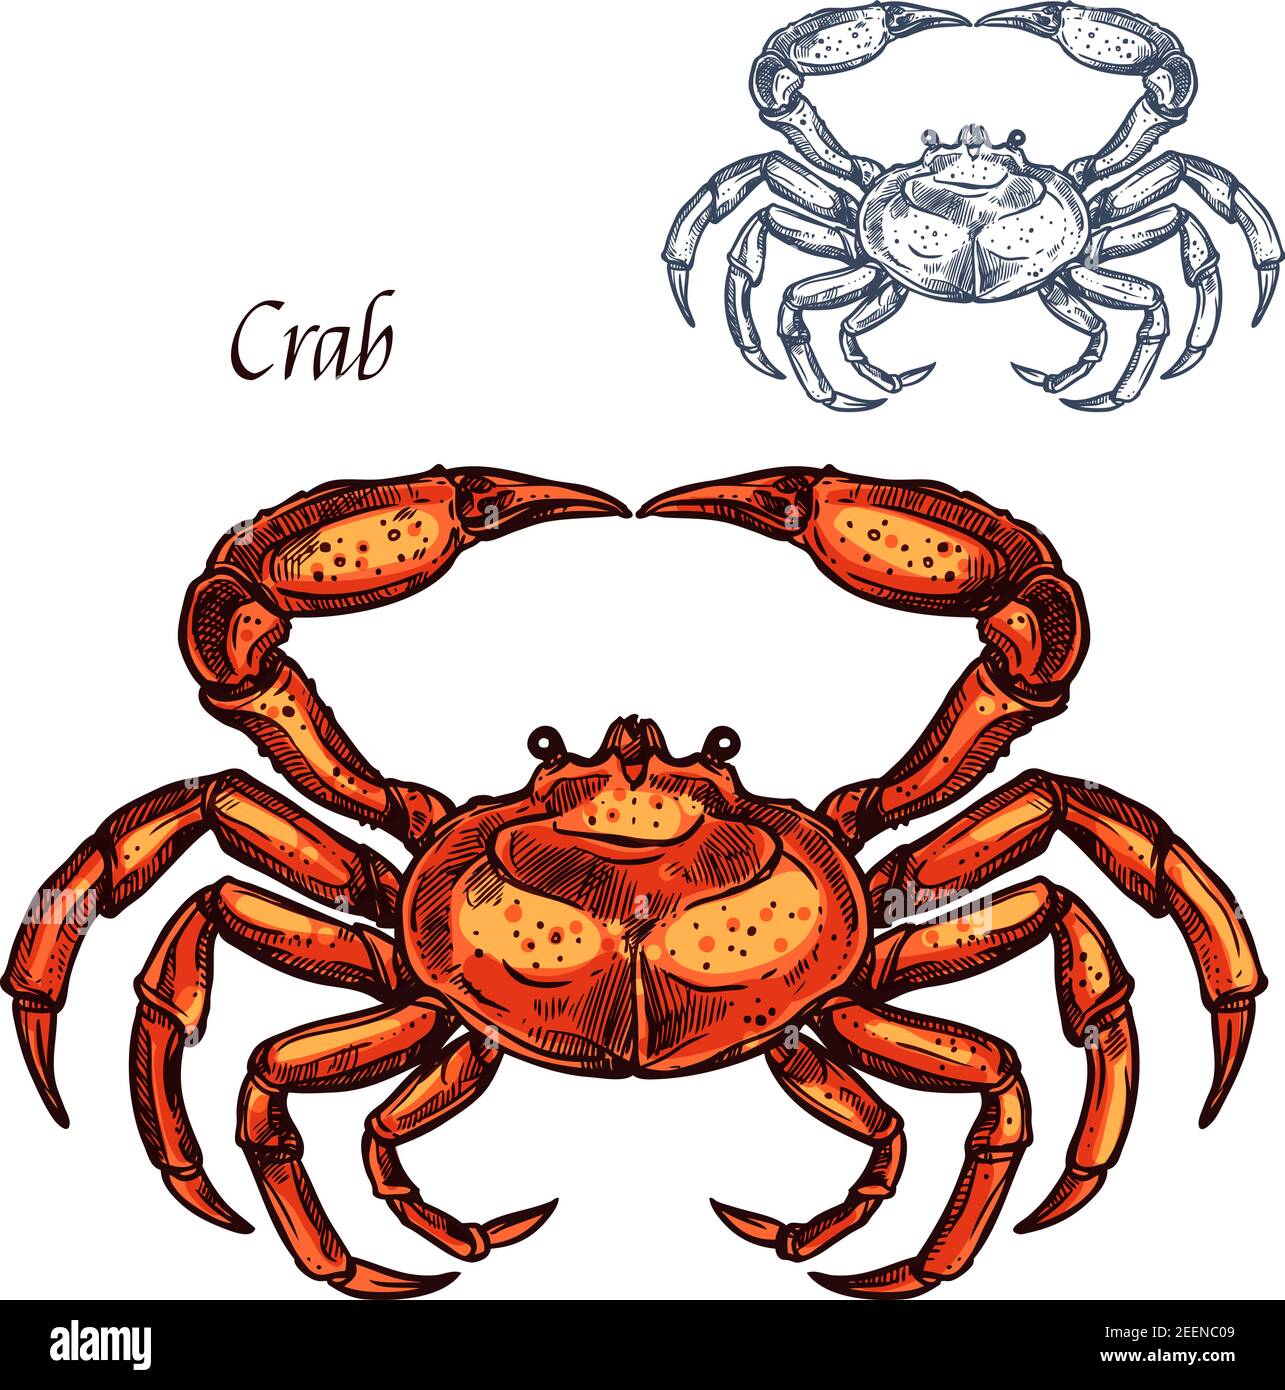 Crab animal isolated sketch. Ocean crustacean, sea crab or lobster sign with red shell and claw. Marine shellfish symbol for seafood restaurant or und Stock Vector